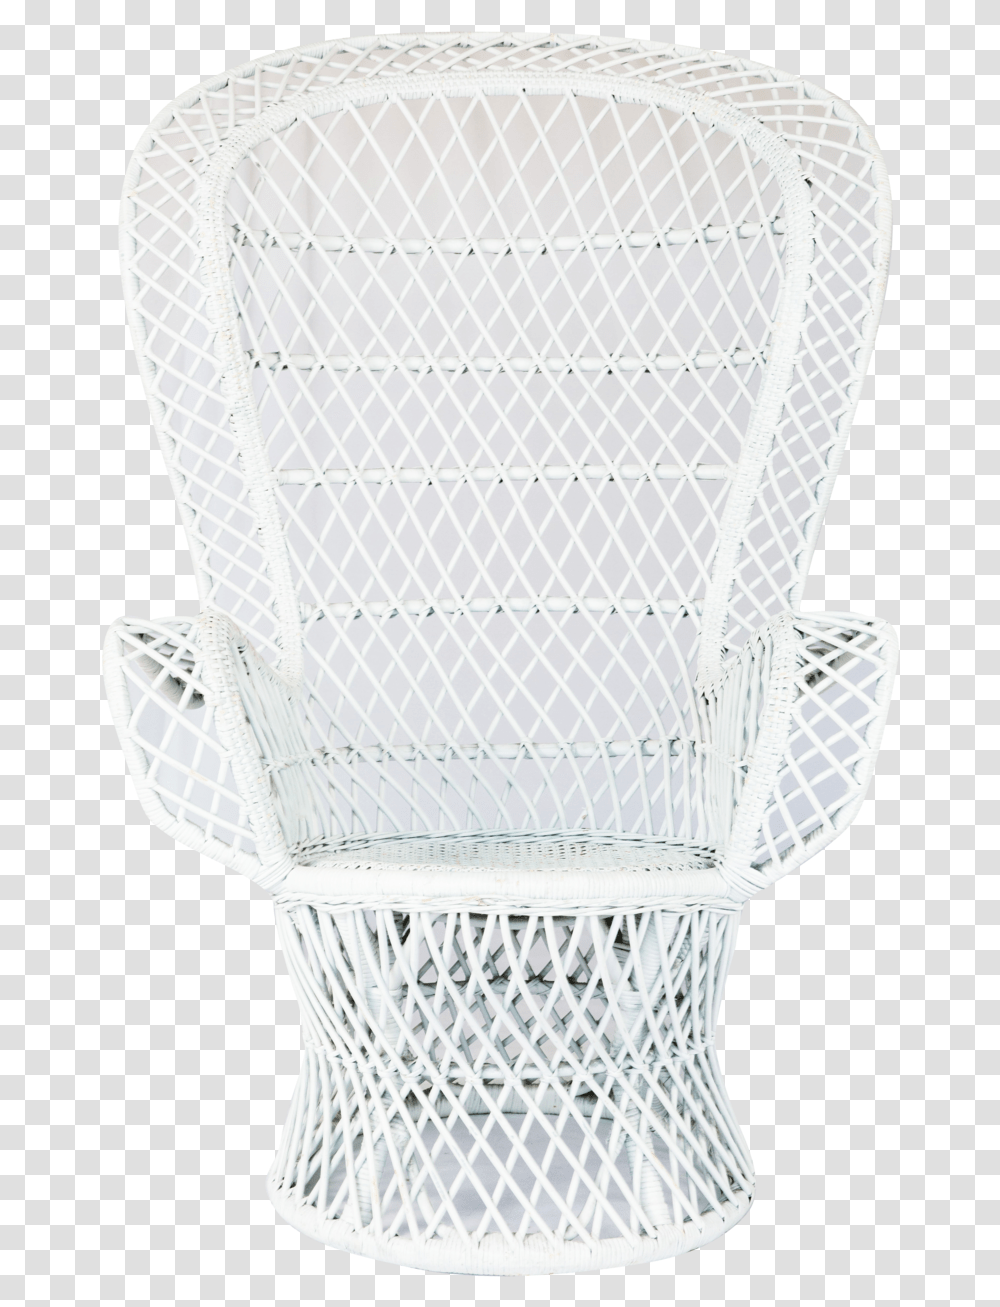 Download Hd King Lunalilo Peacock Chair Chair, Furniture, Crib, Cradle Transparent Png